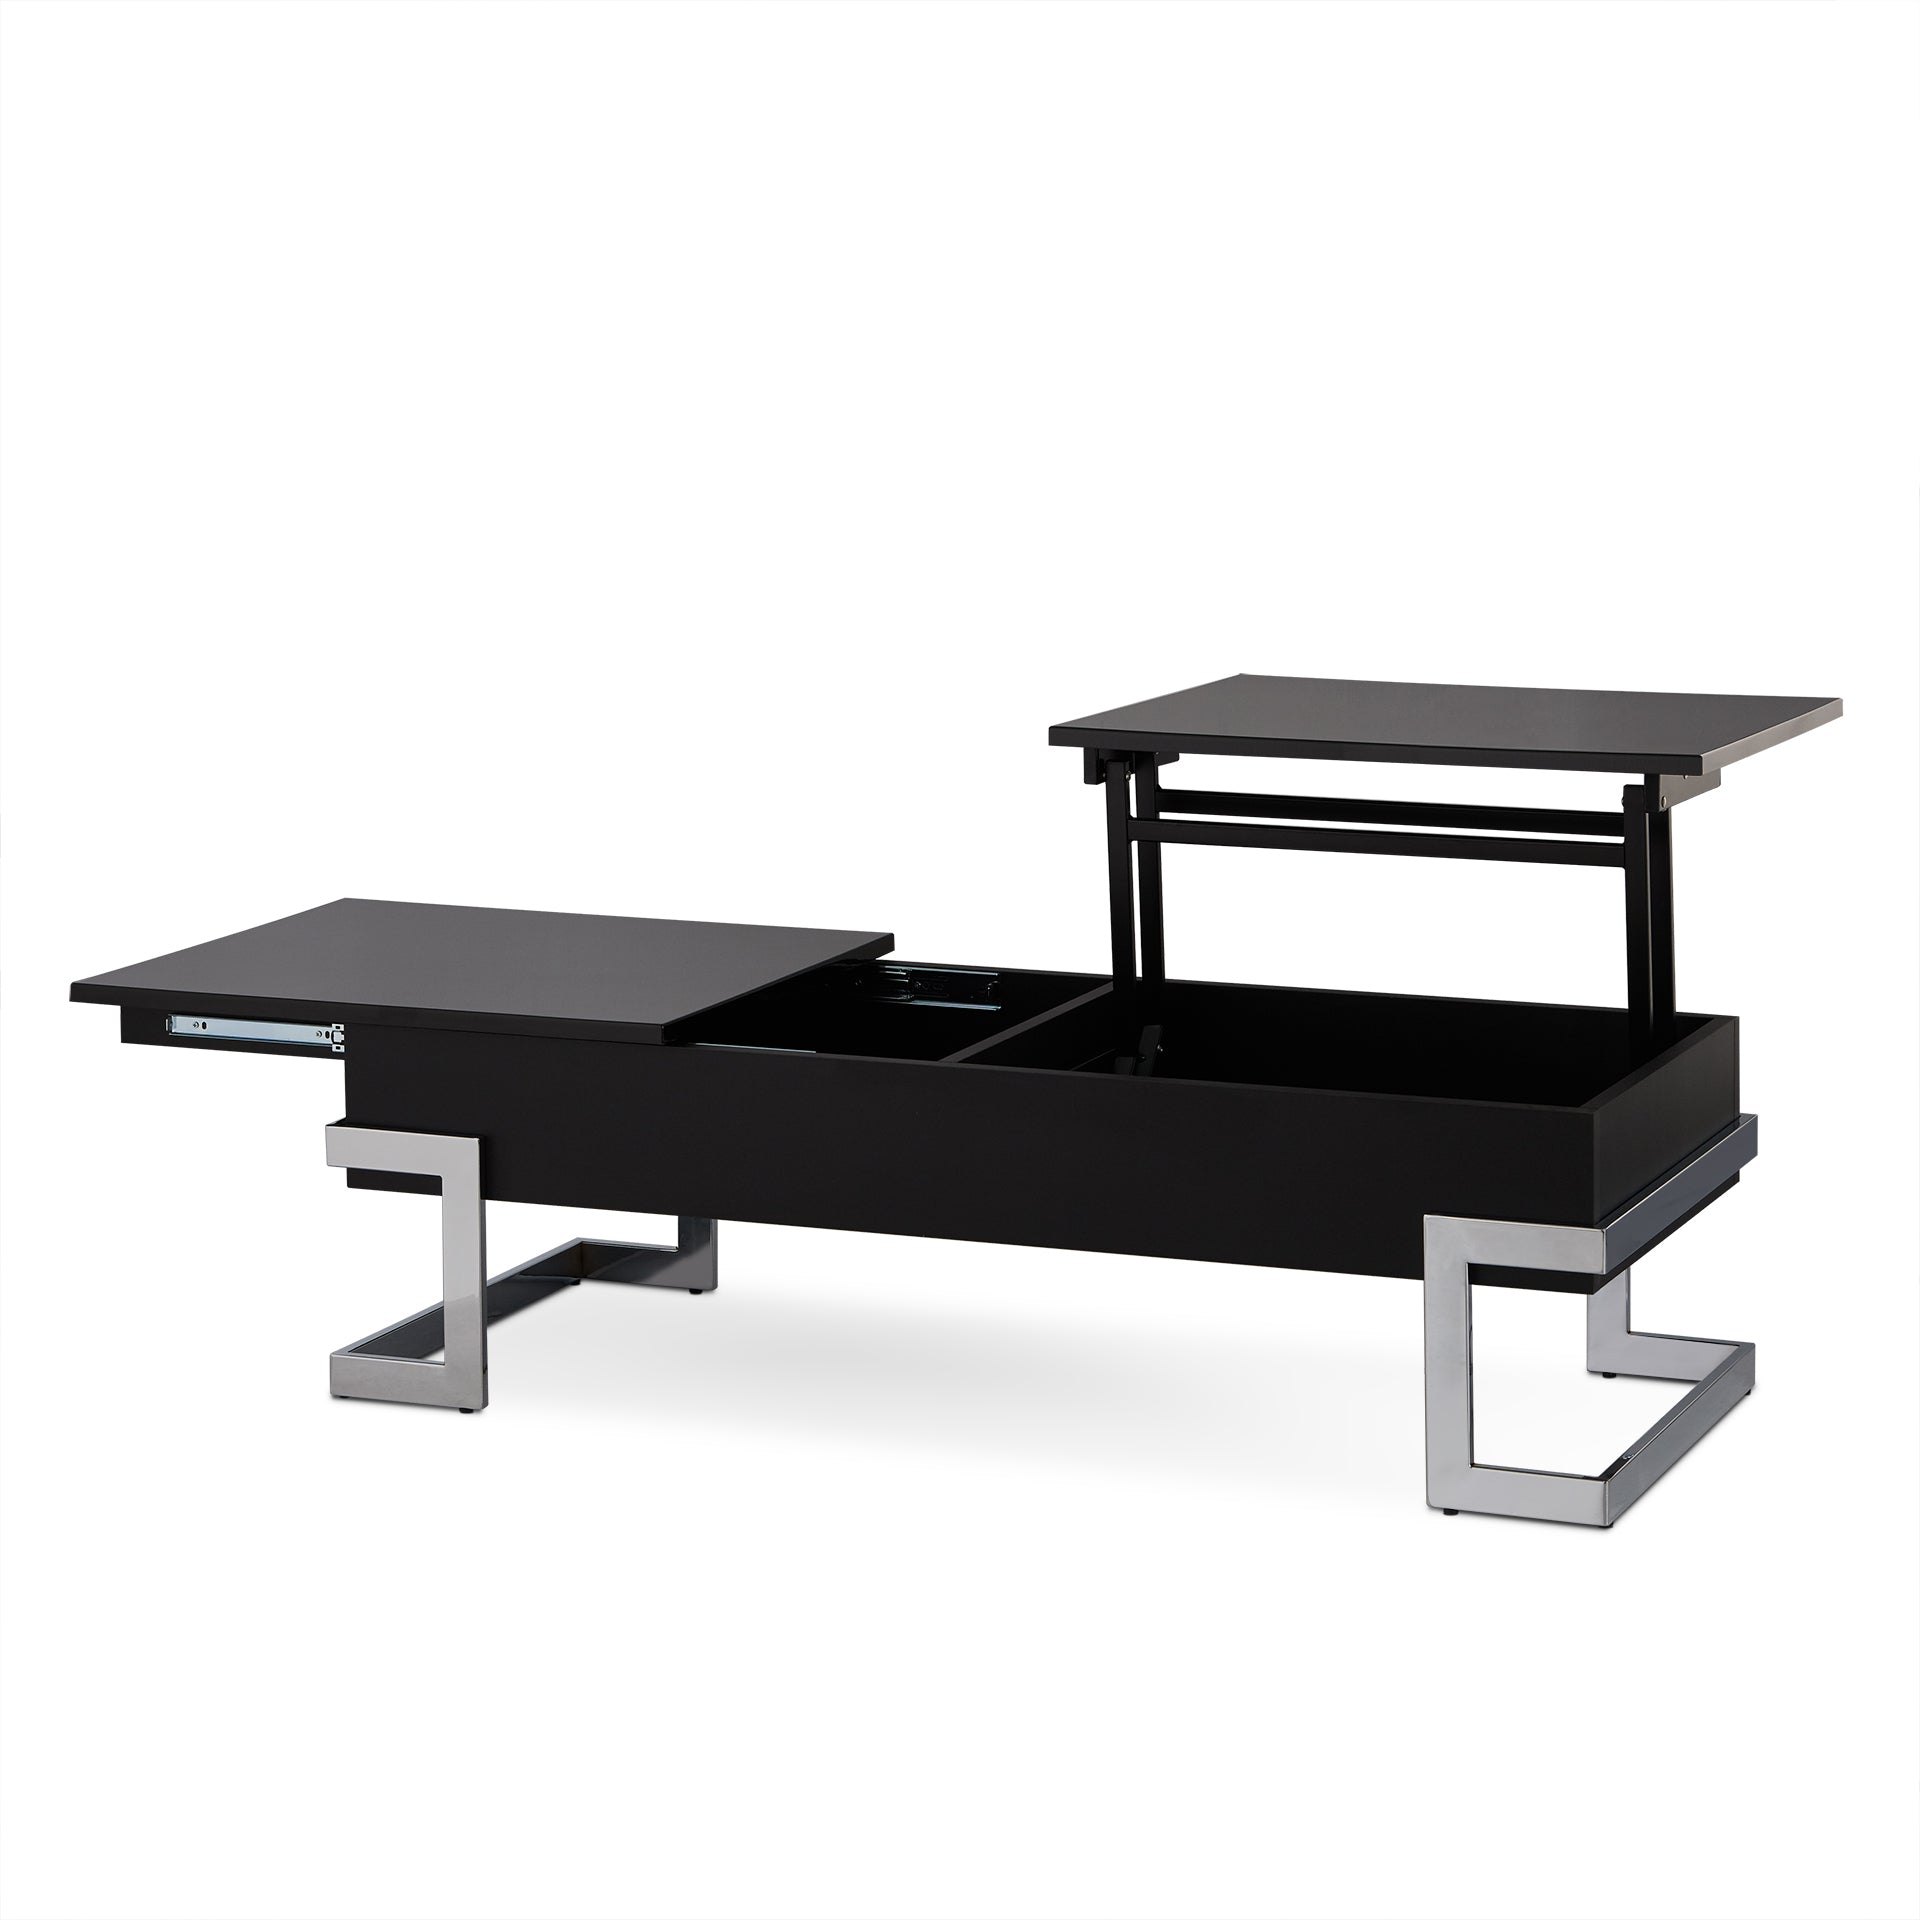 47" Black And Silver Iron Lift Top Coffee Table